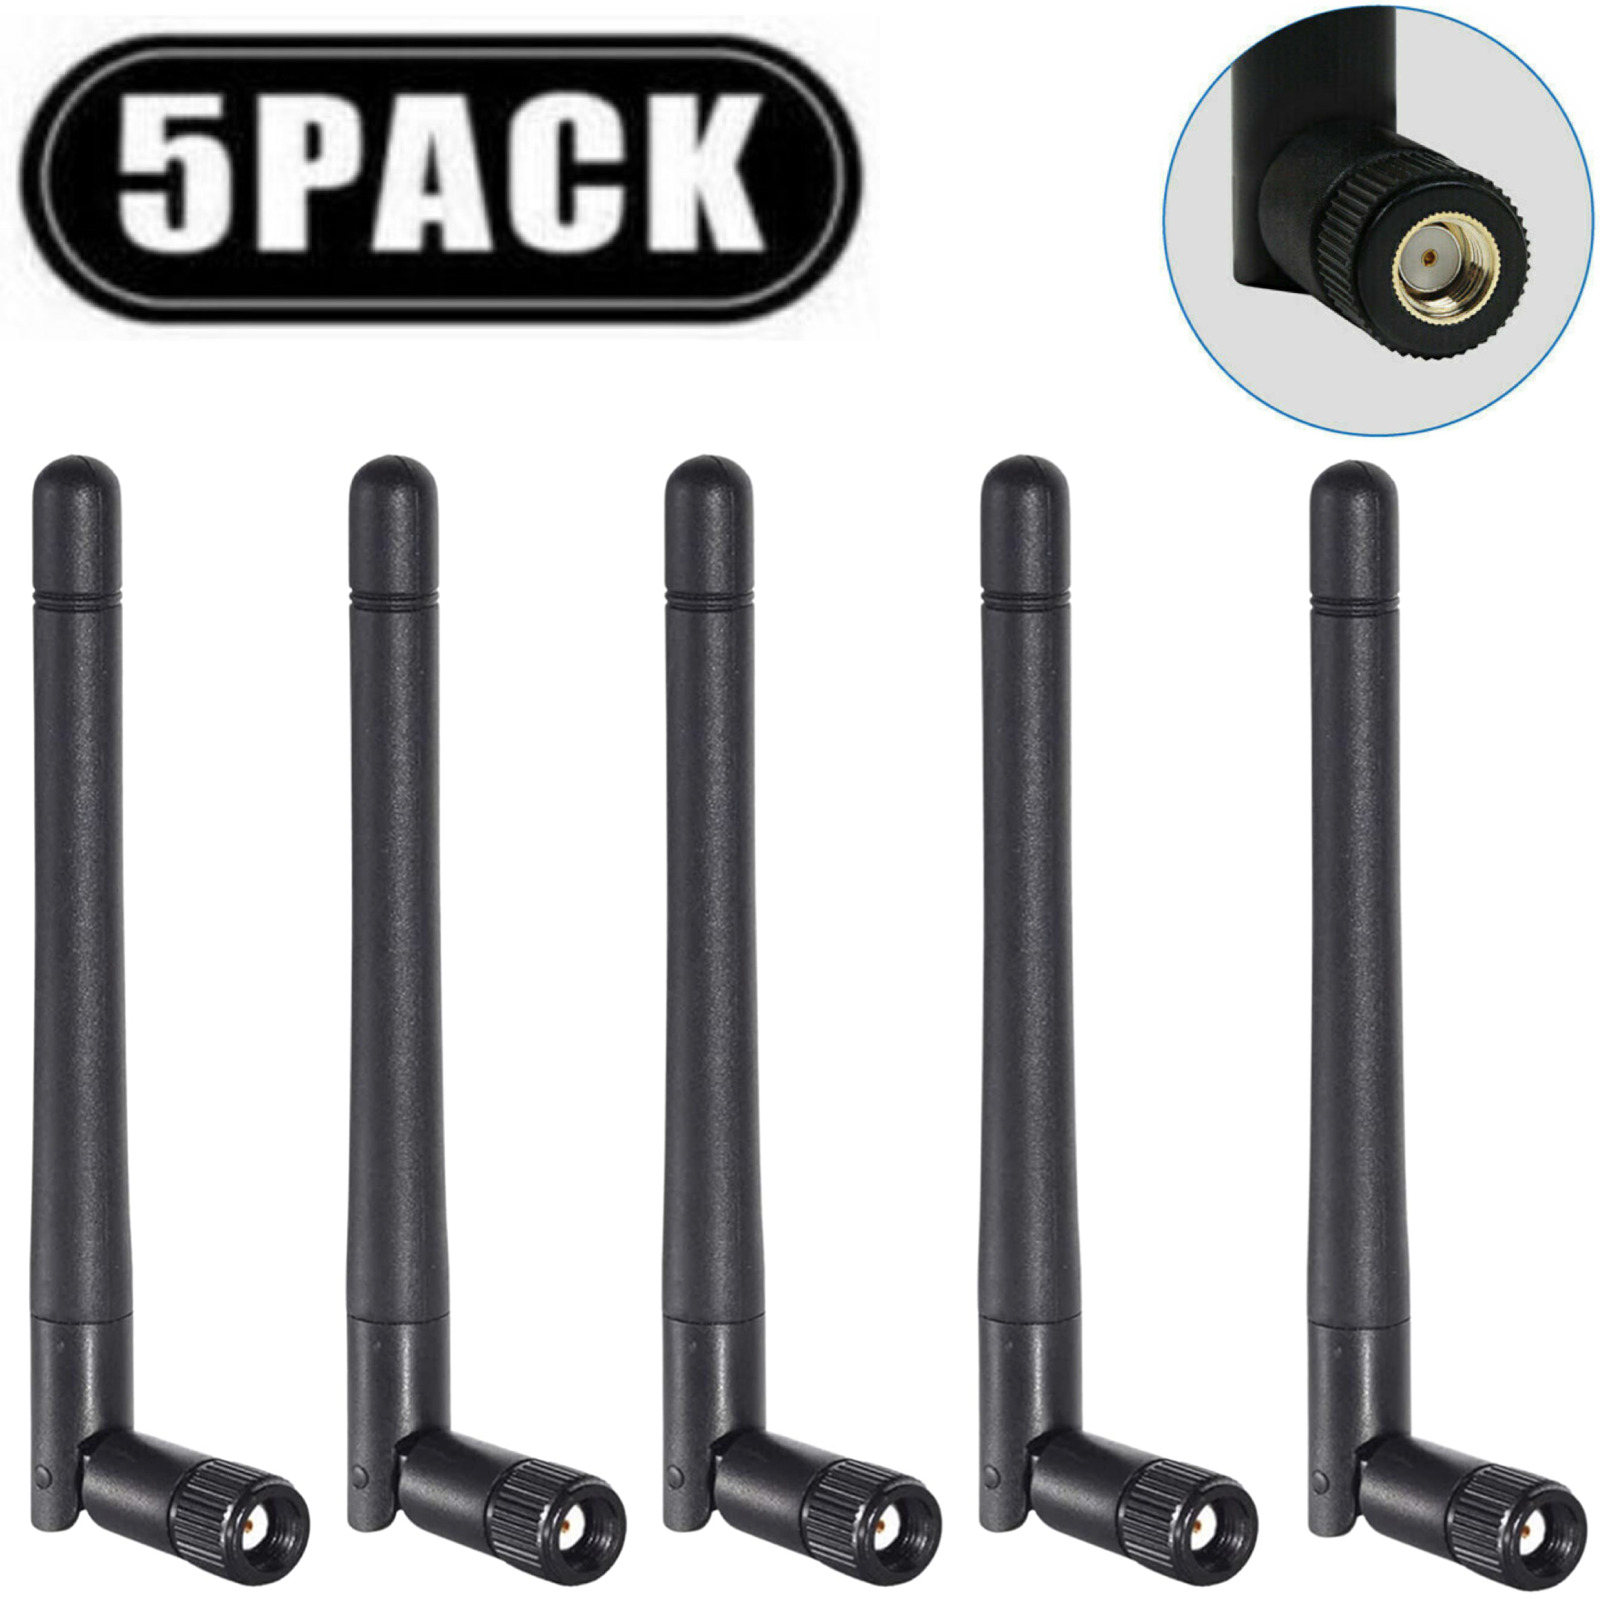 5-PACK LOT RP-SMA Antenna for WiFi 2.4GHz/5Ghz Wireless Router or Card (Black)